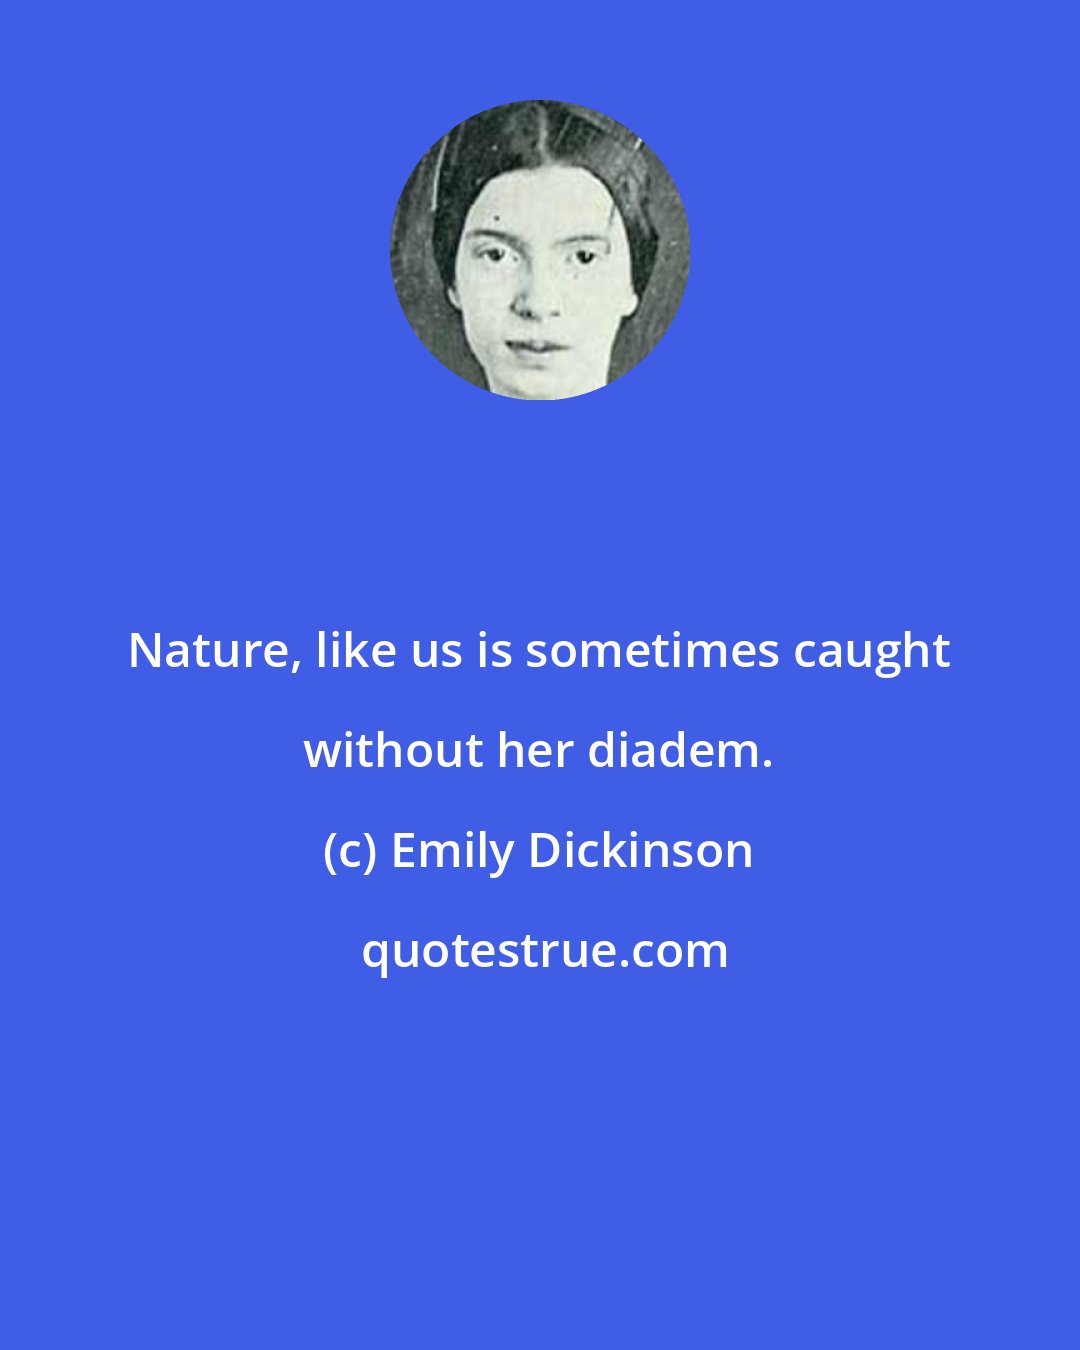 Emily Dickinson: Nature, like us is sometimes caught without her diadem.